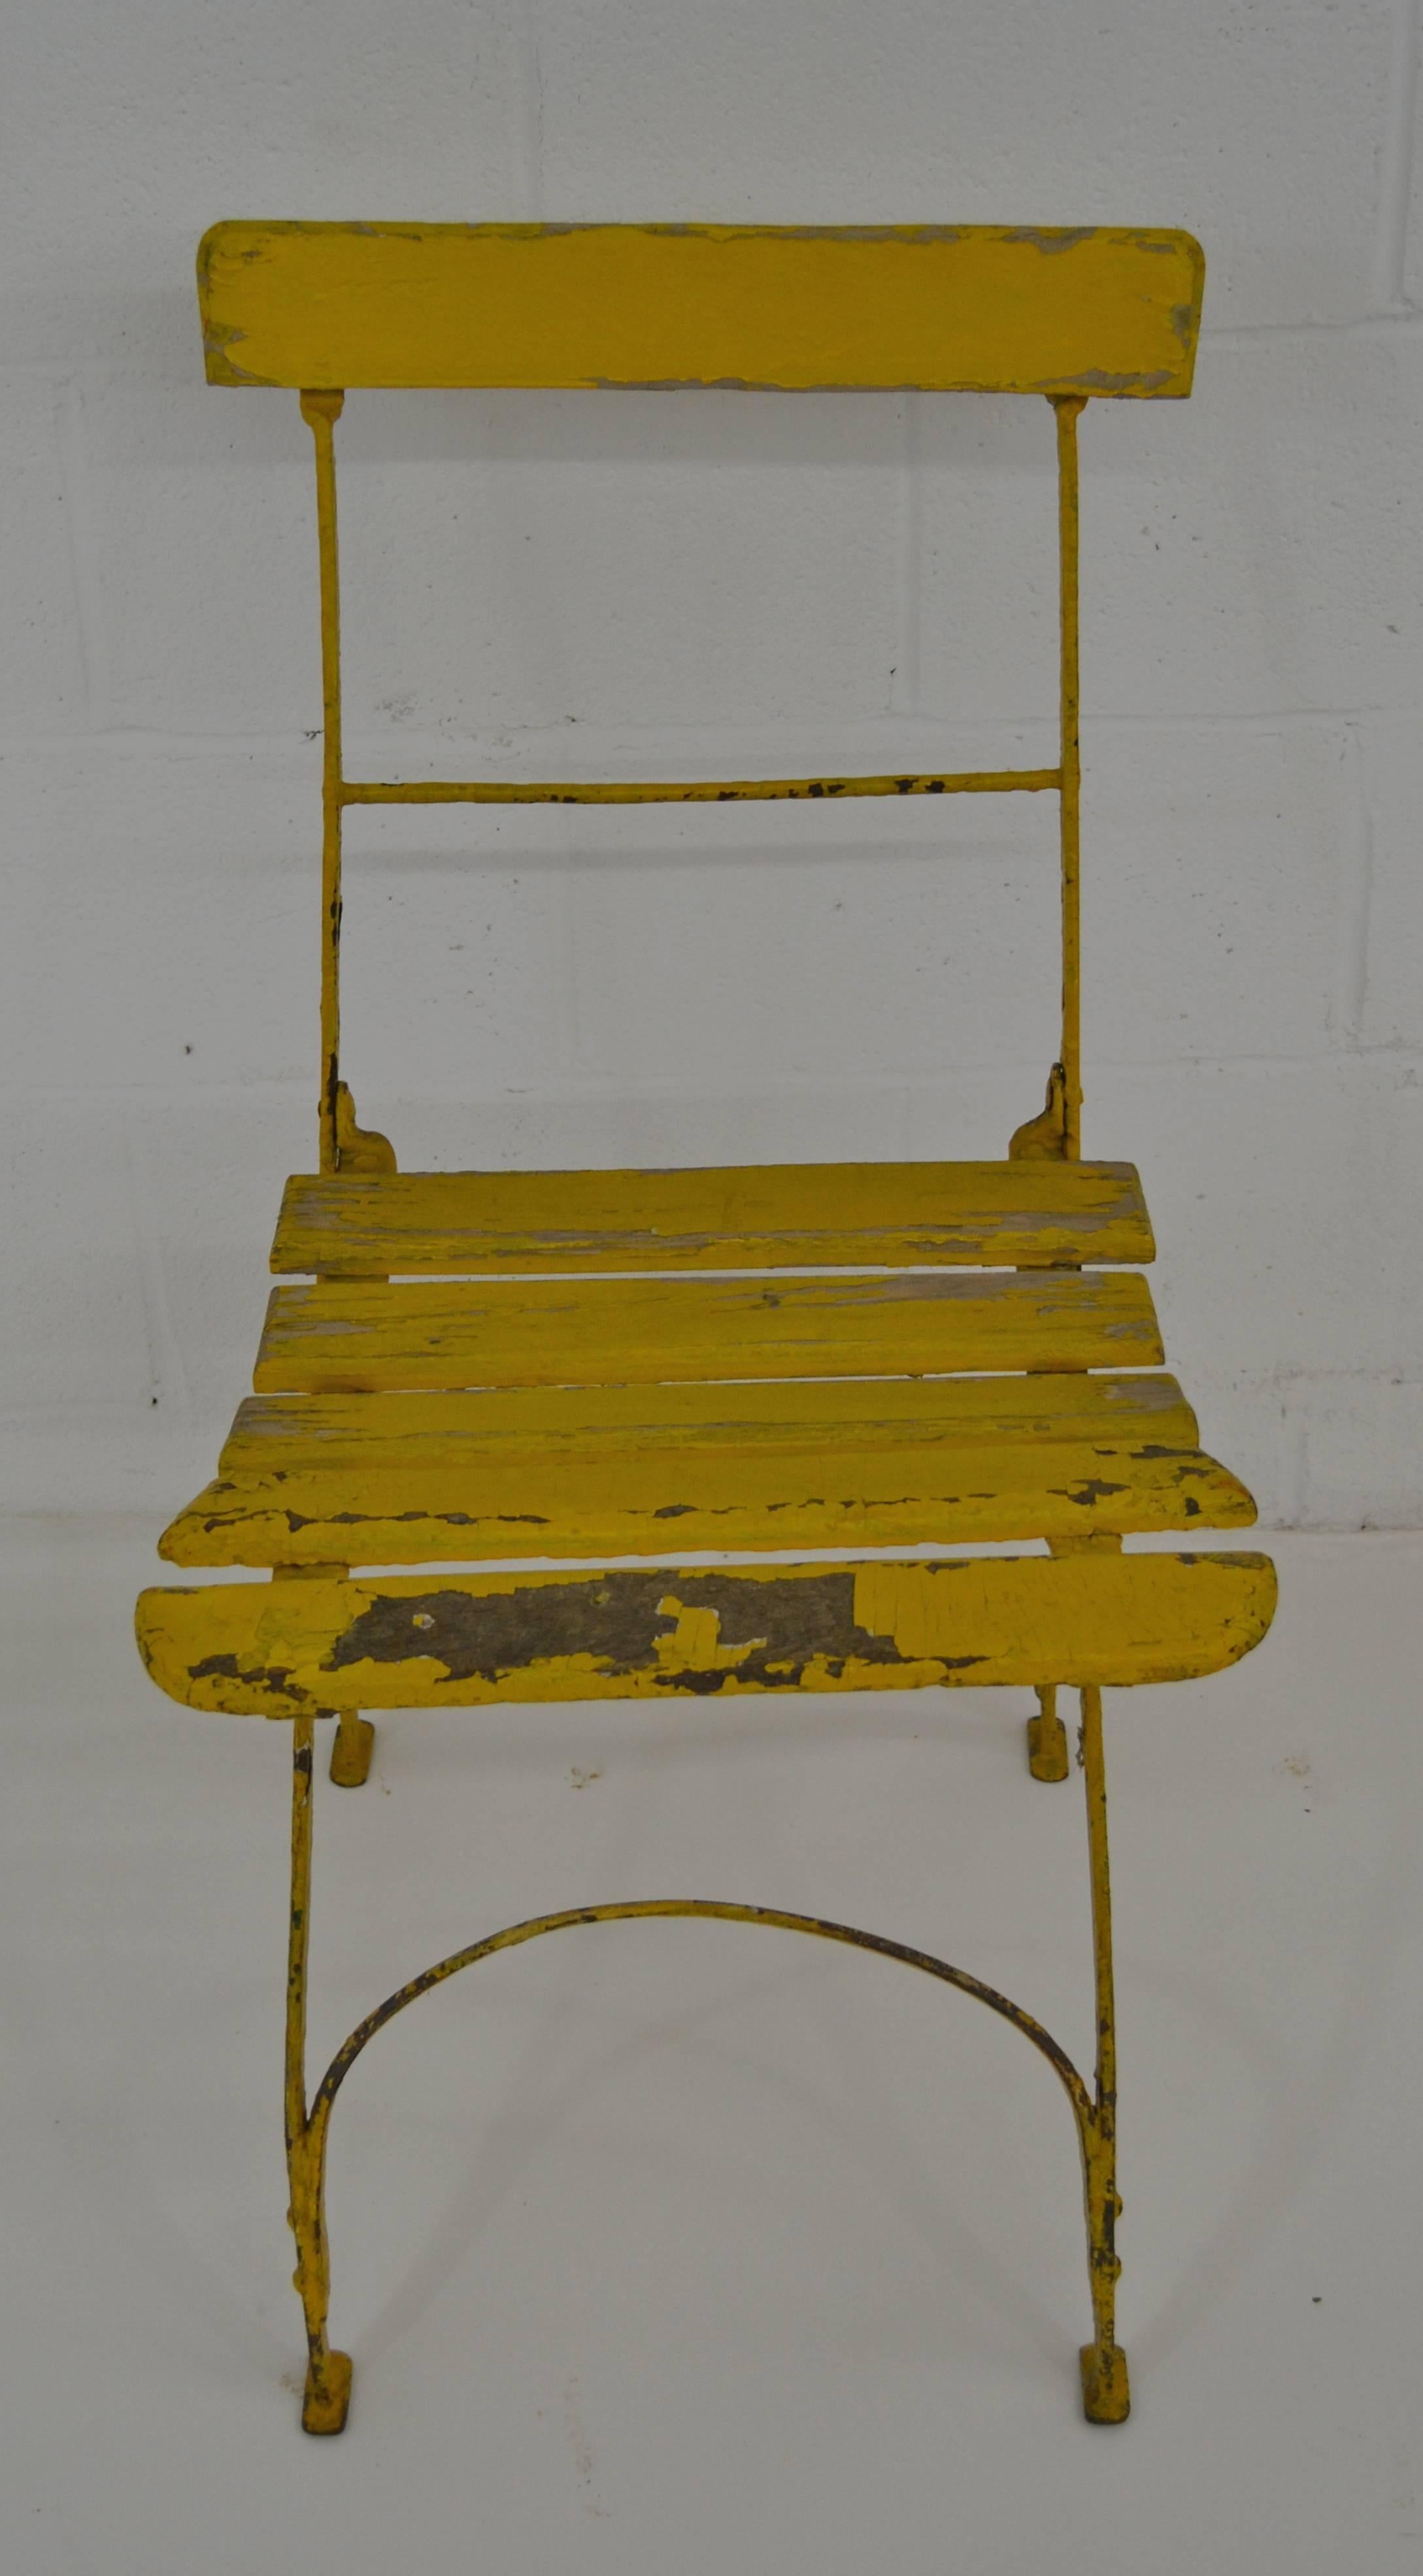 A single vintage wrought iron folding bistro chair with oak back rail and seat slats.  In original very worn yellow paint.
